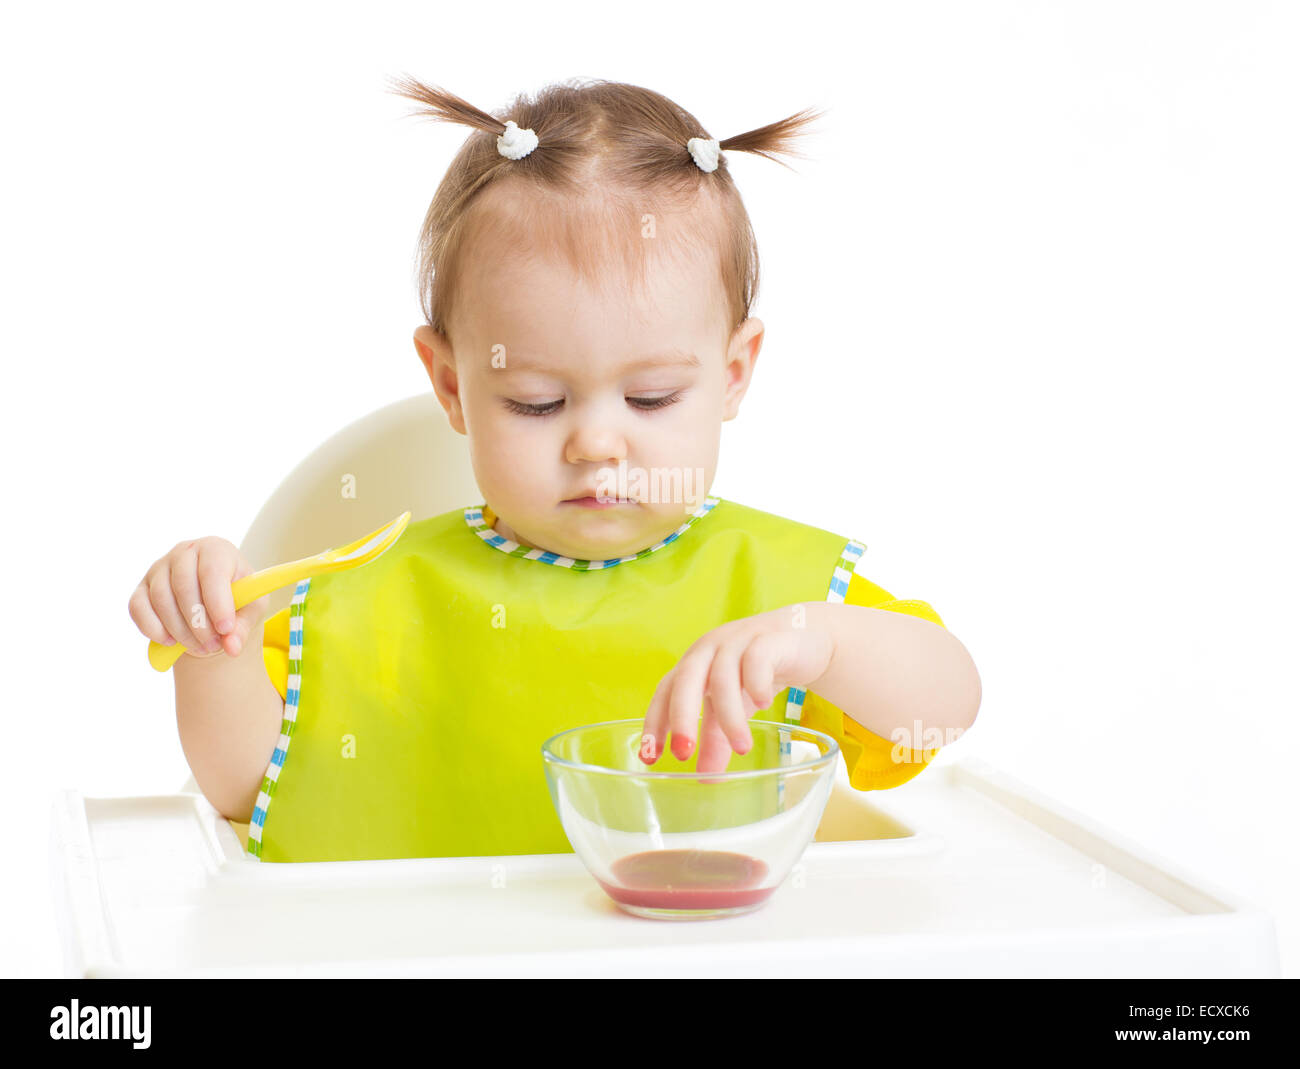 Baby eating and put fingers into food sitting at table Stock Photo